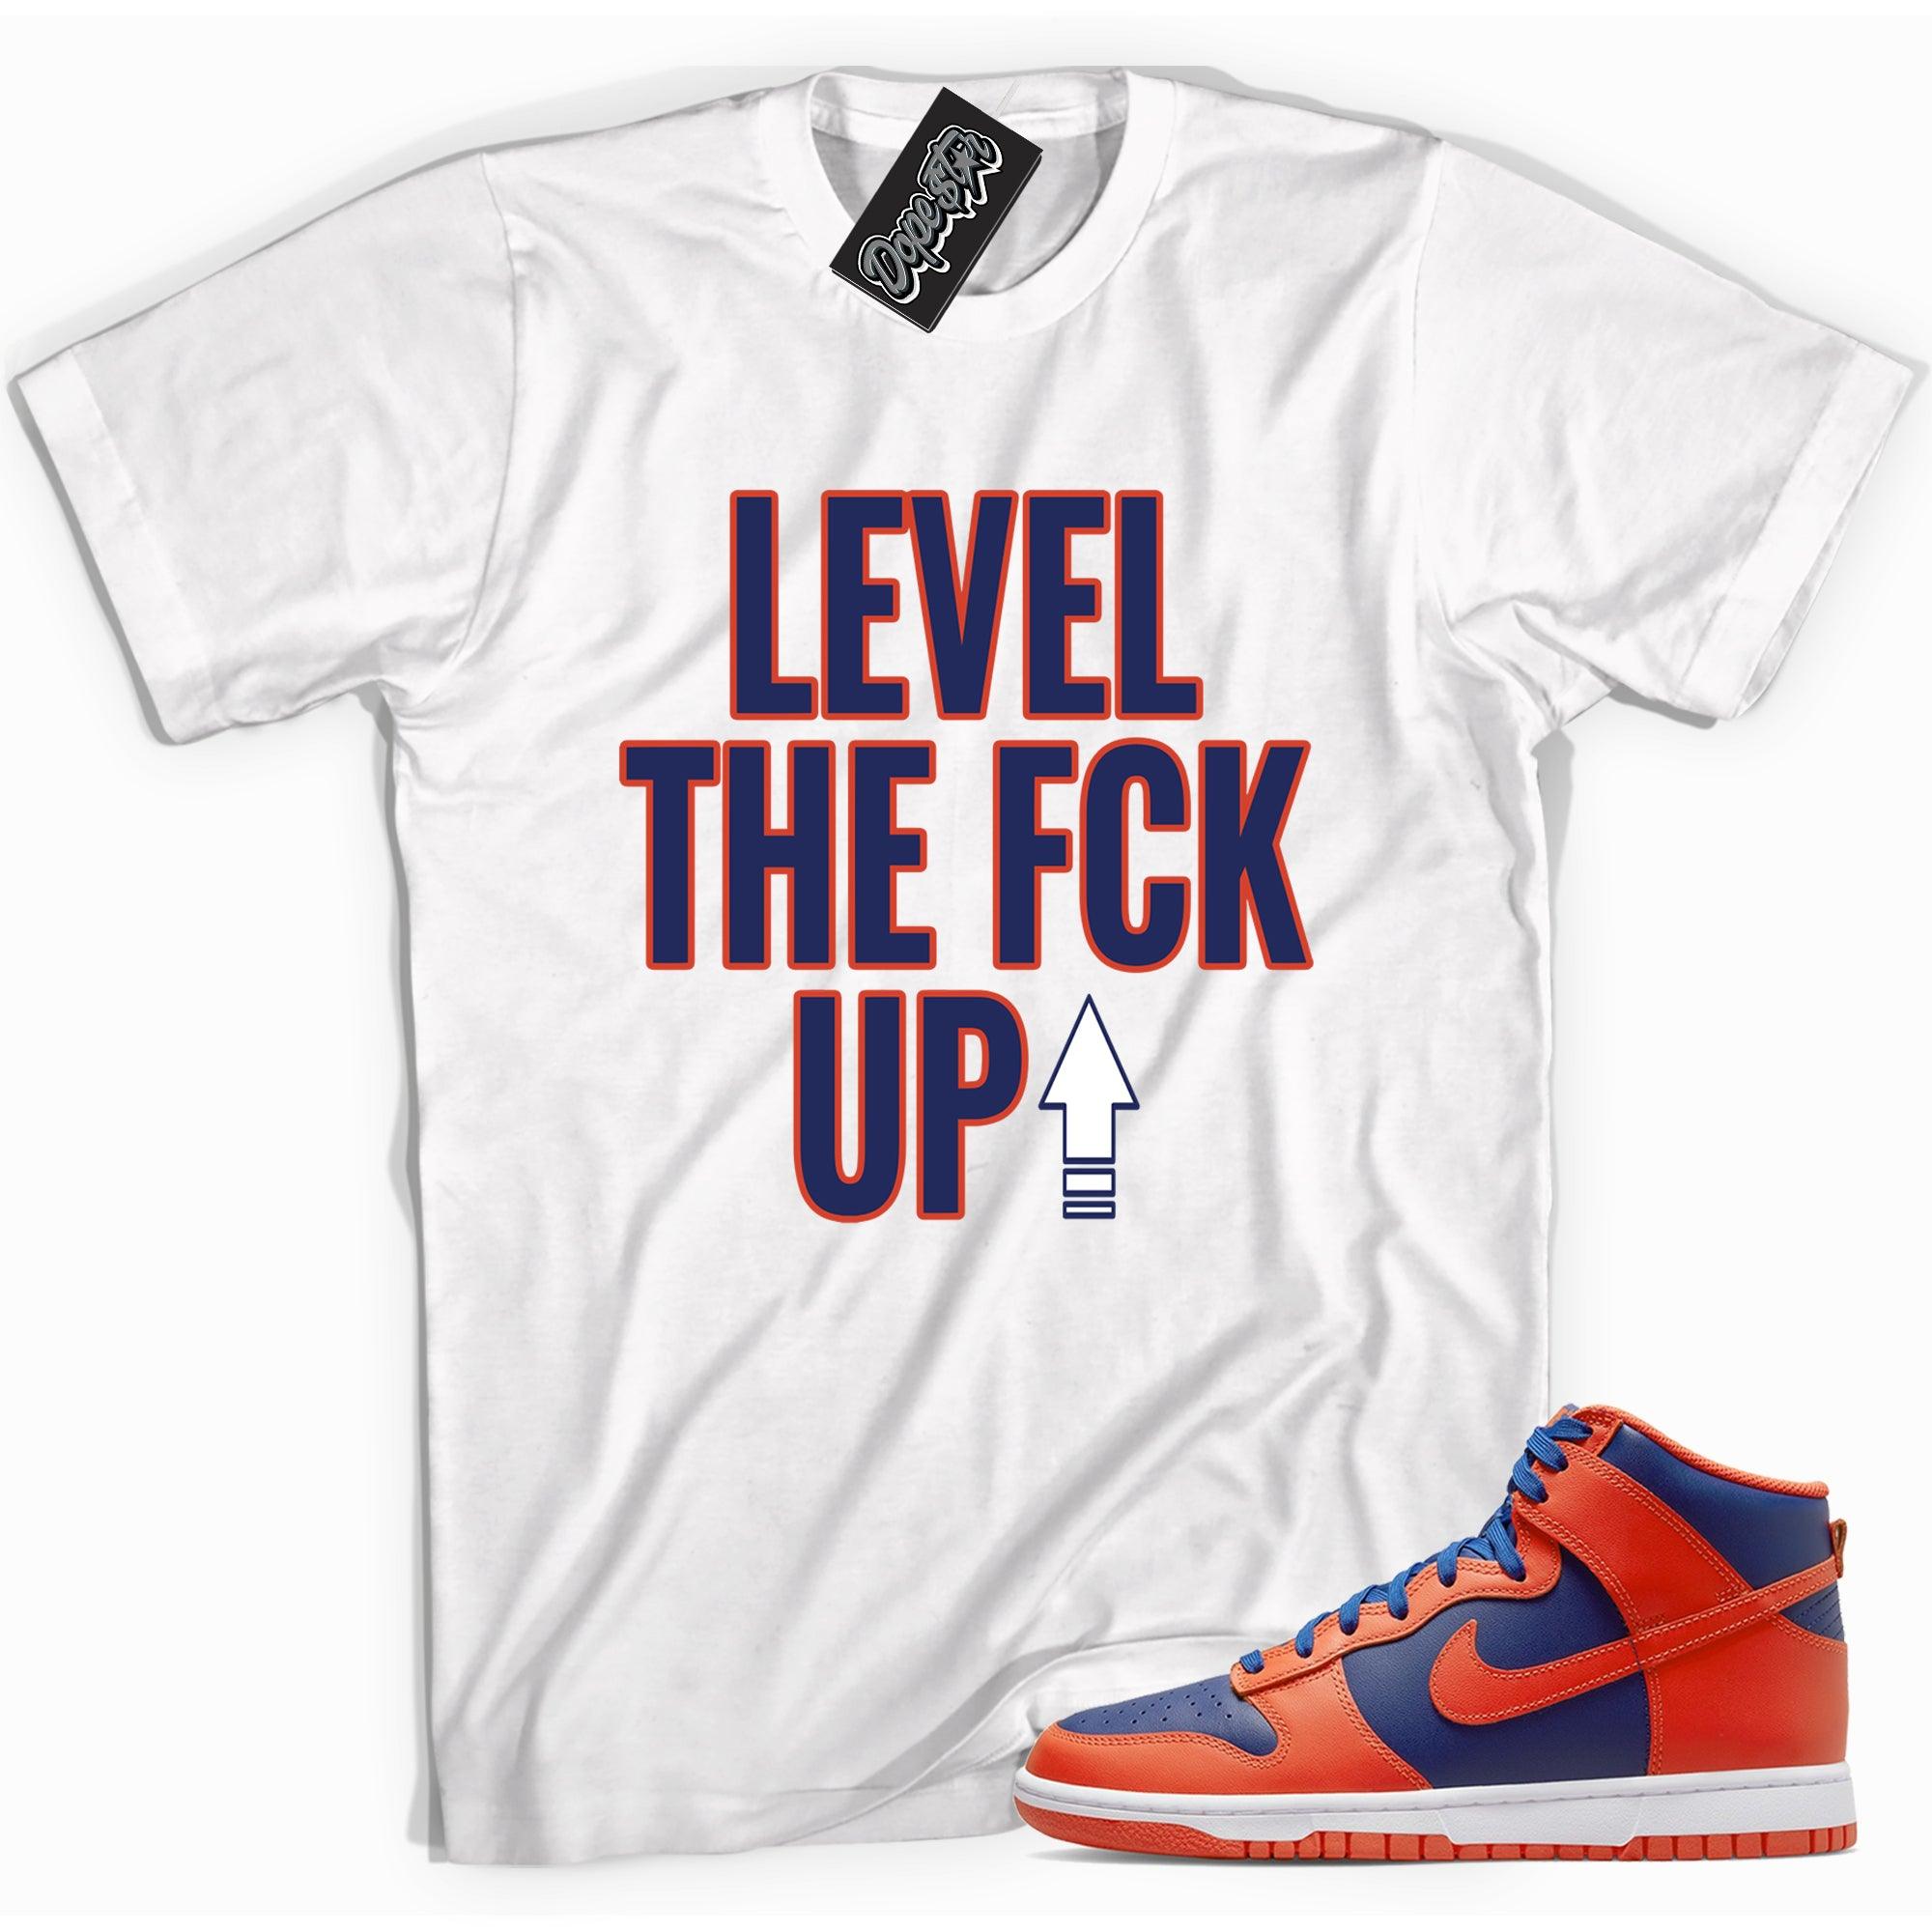 Cool white graphic tee with 'Level Up' print, that perfectly matches Nike Dunk High Knicks sneakers.